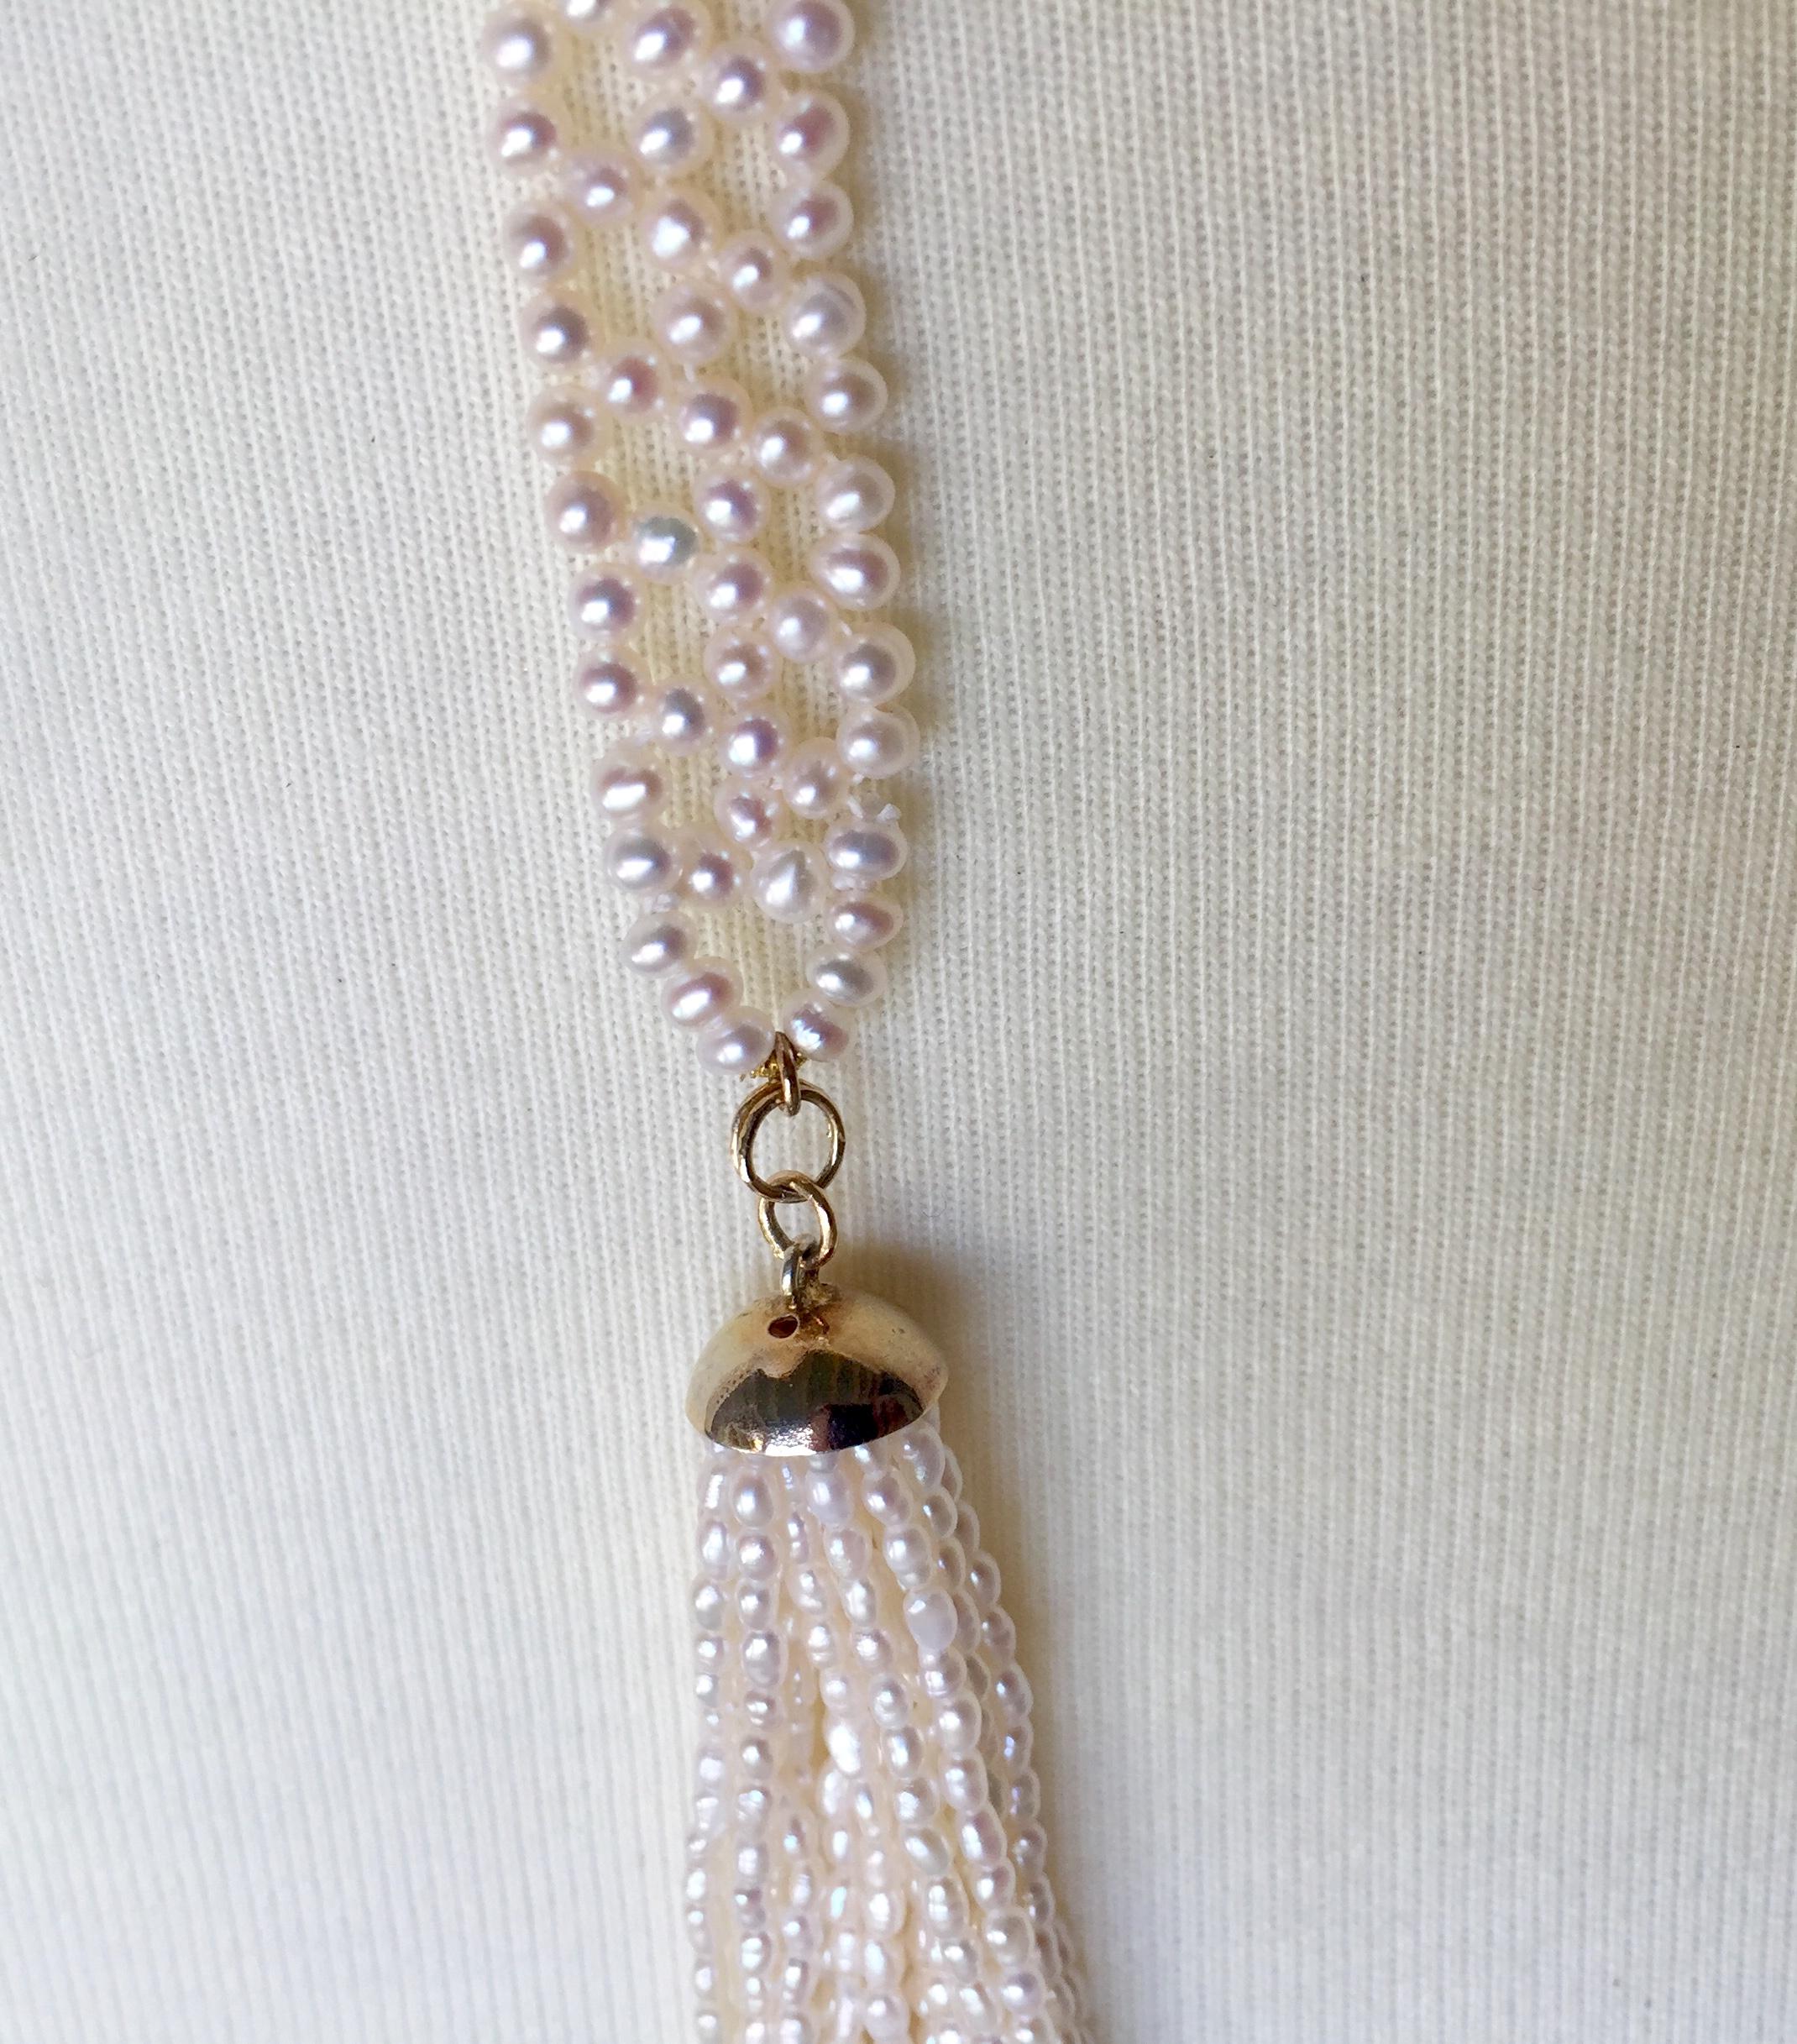 Women's Woven White Pearl Sautoir with 14 Karat Gold, Pearl, and Black Spinel Tassels